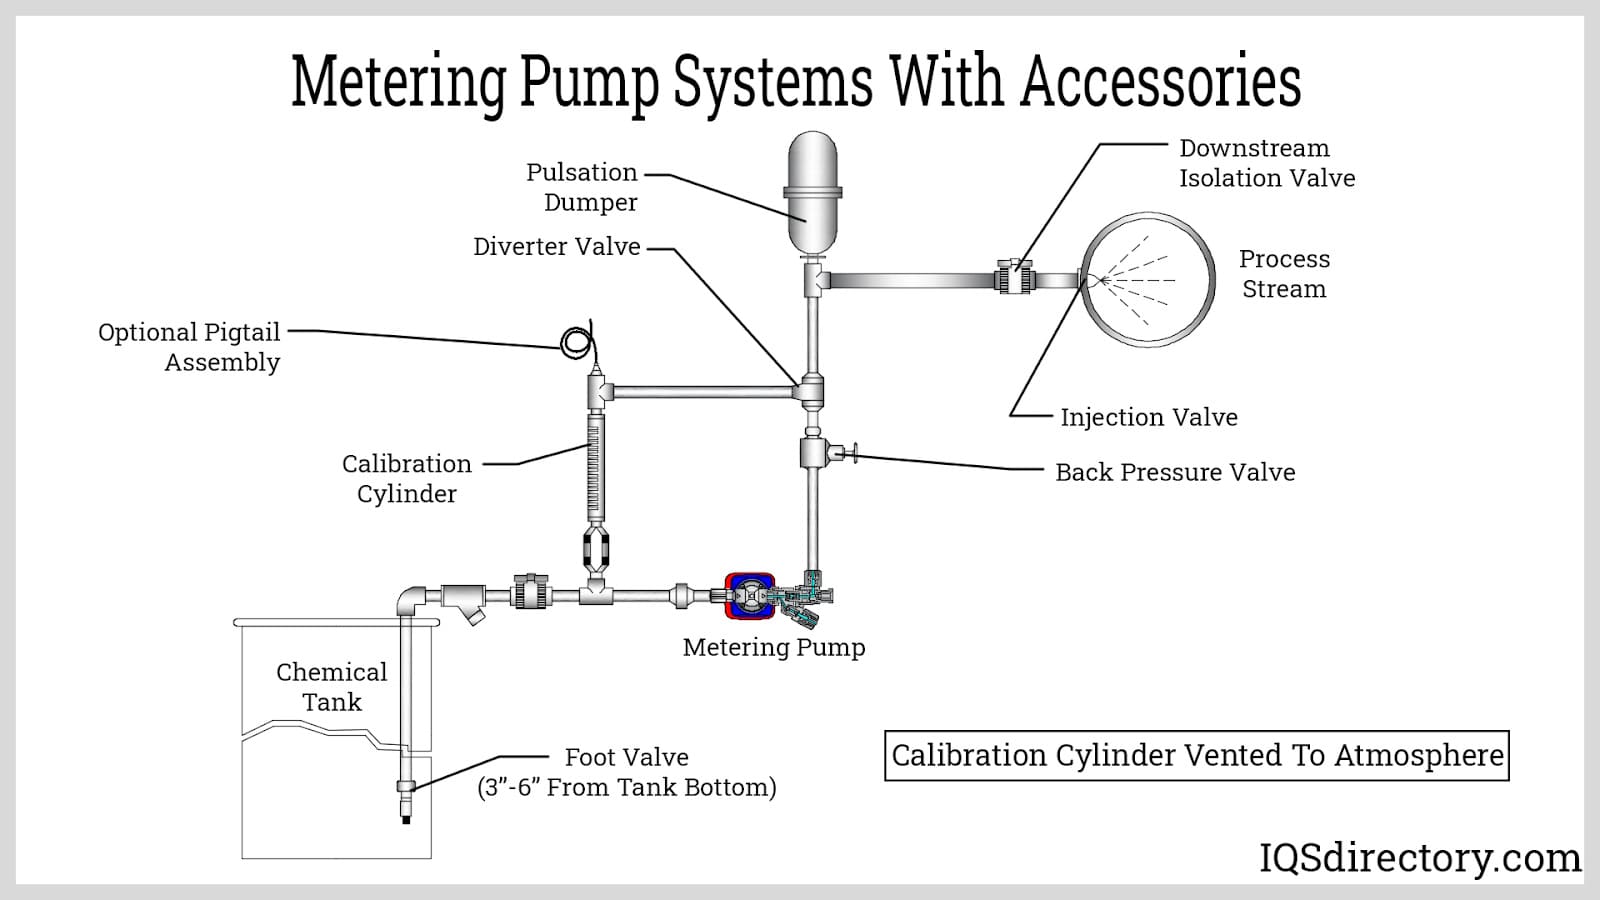 Metering Pump Systems With Accessories